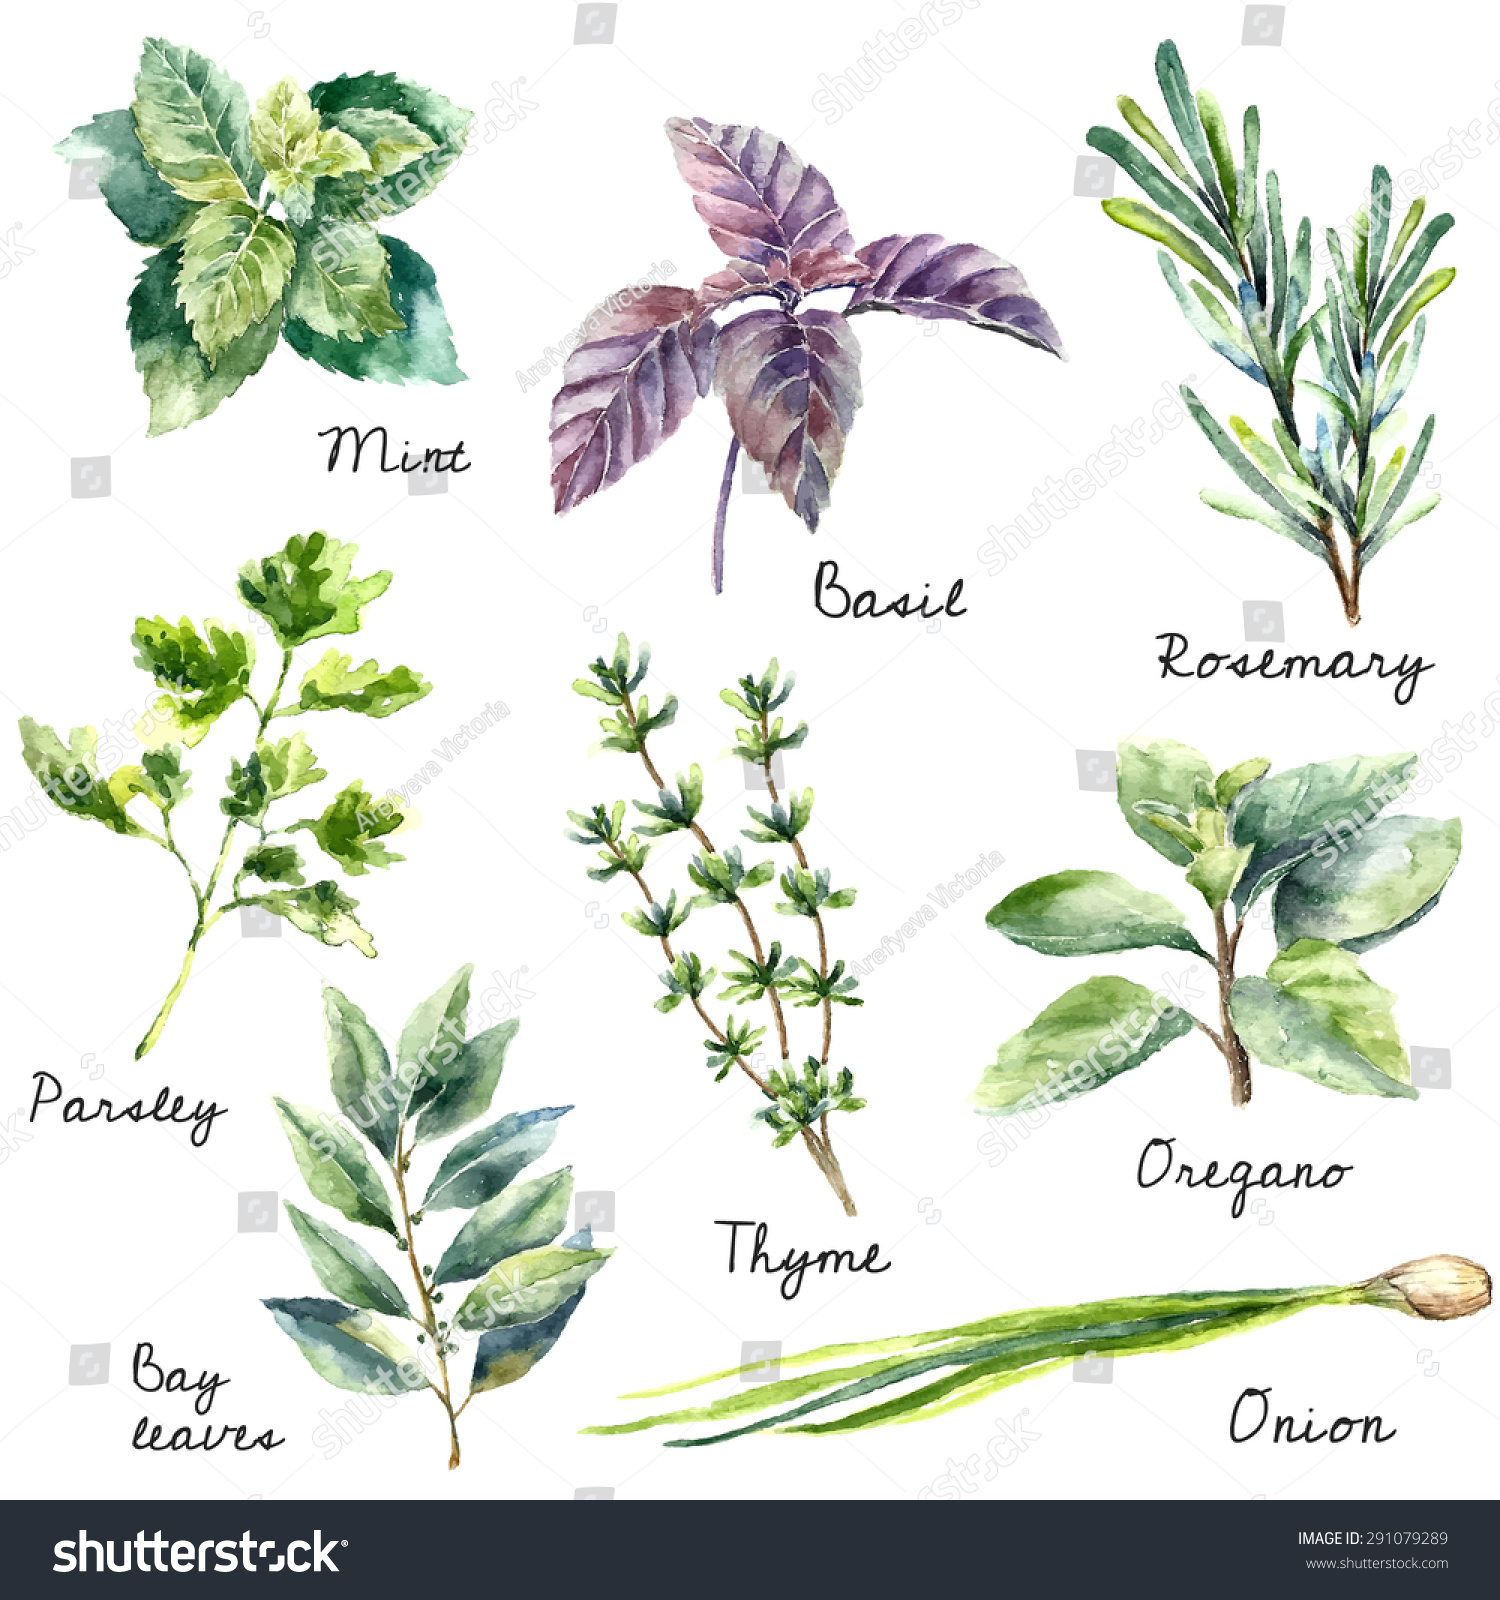 Watercolor collection of fresh herbs isolated: mint, basil, rosemary, parsley, oregano, thyme, bay leaves, green onion.Herbs vector object isolated on white background. Kitchen herbs and spices banner